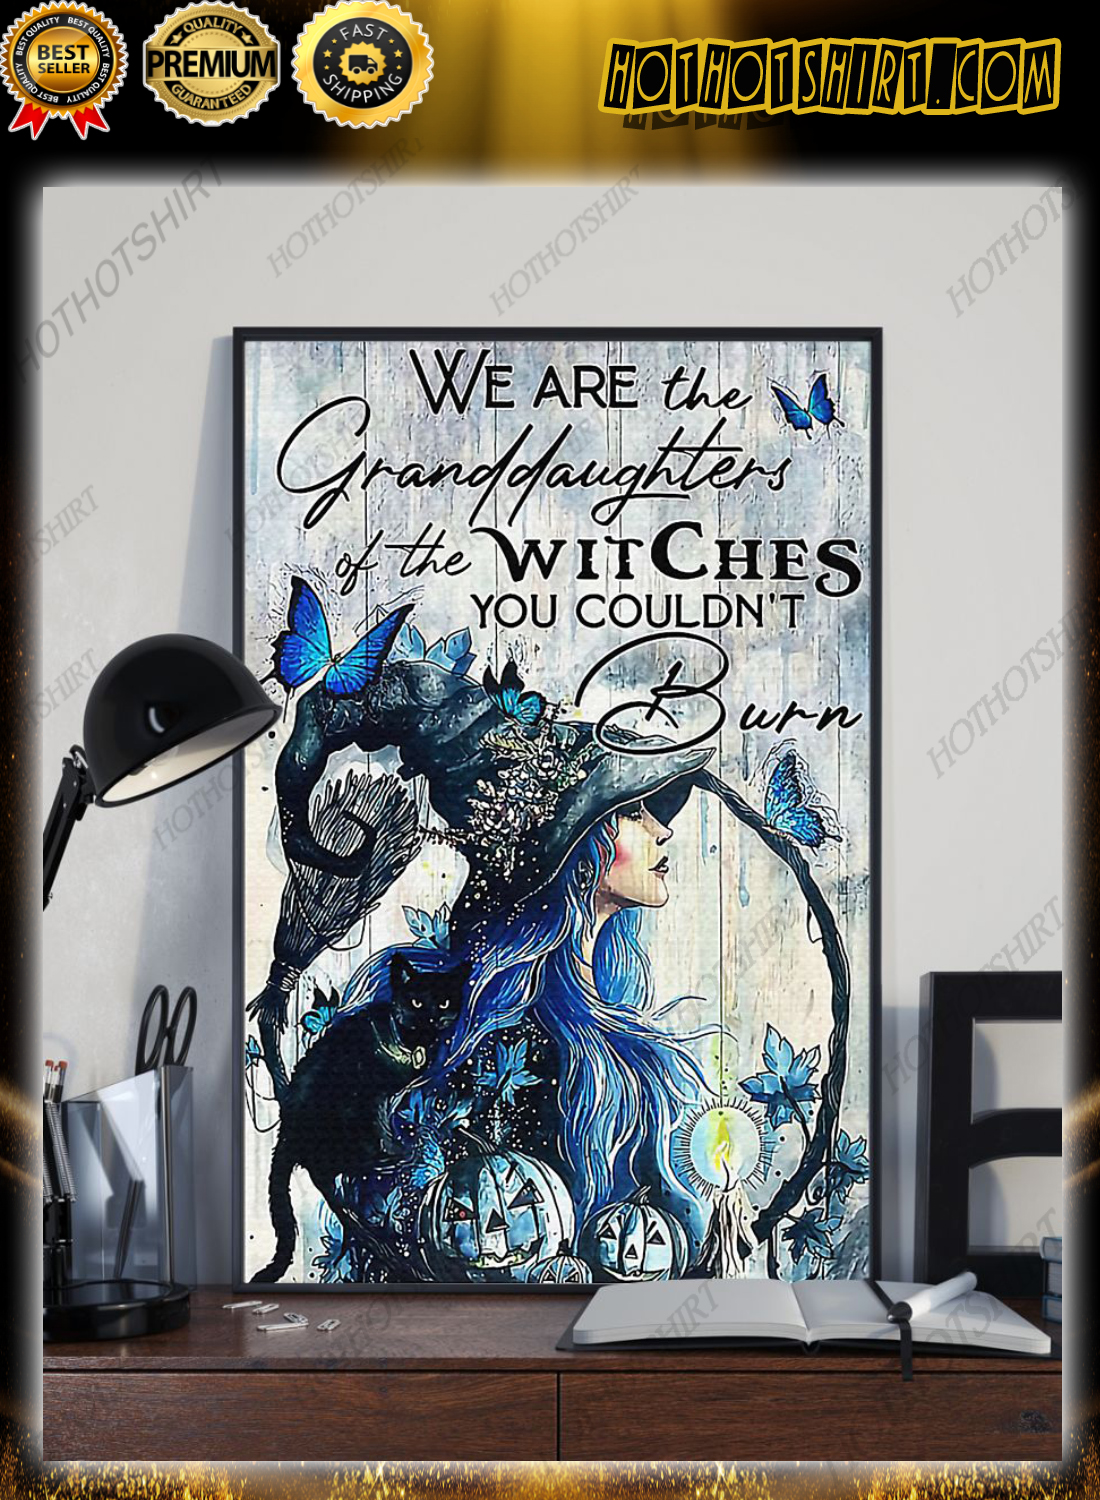 We are the granddaughter of the witches you couldn't burn poster